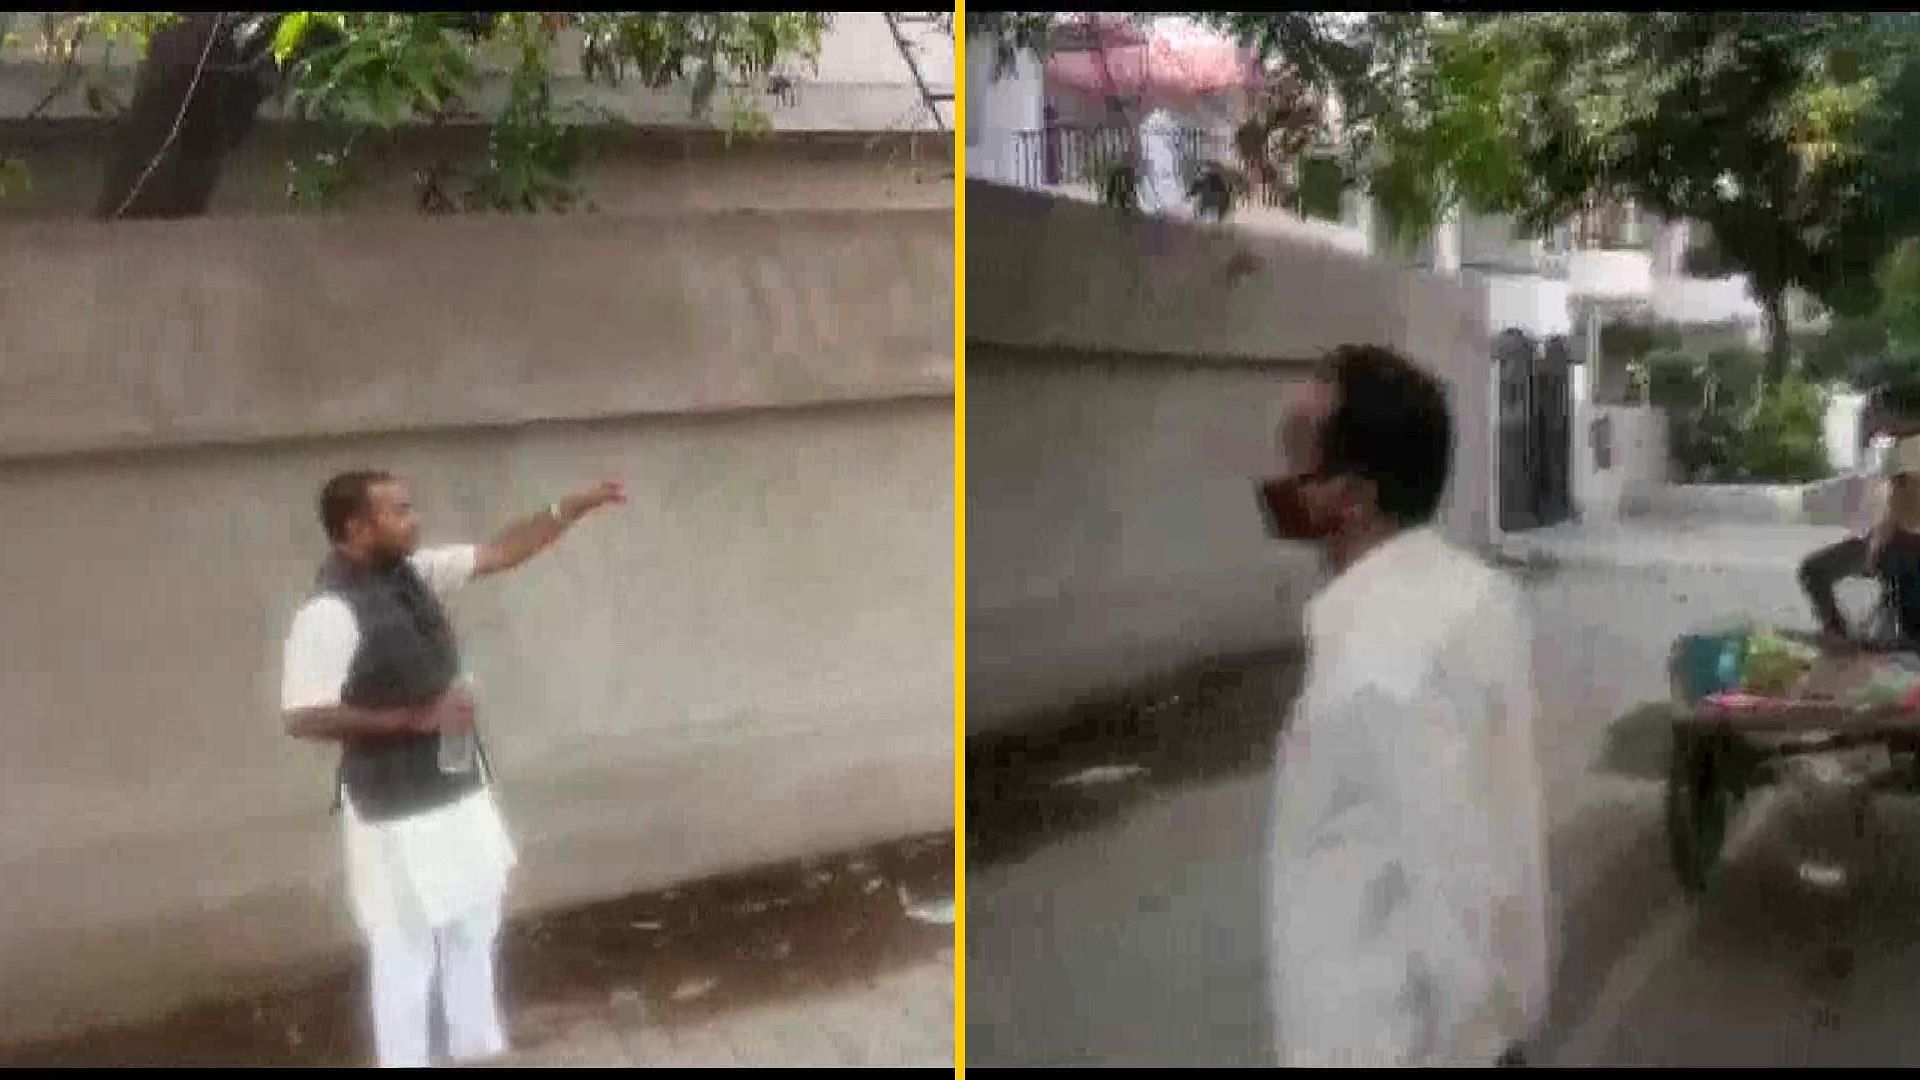 BJP MLA Brij Bhushan Sharan is seen harassing the vendor, asking him to reveal his religious identity.